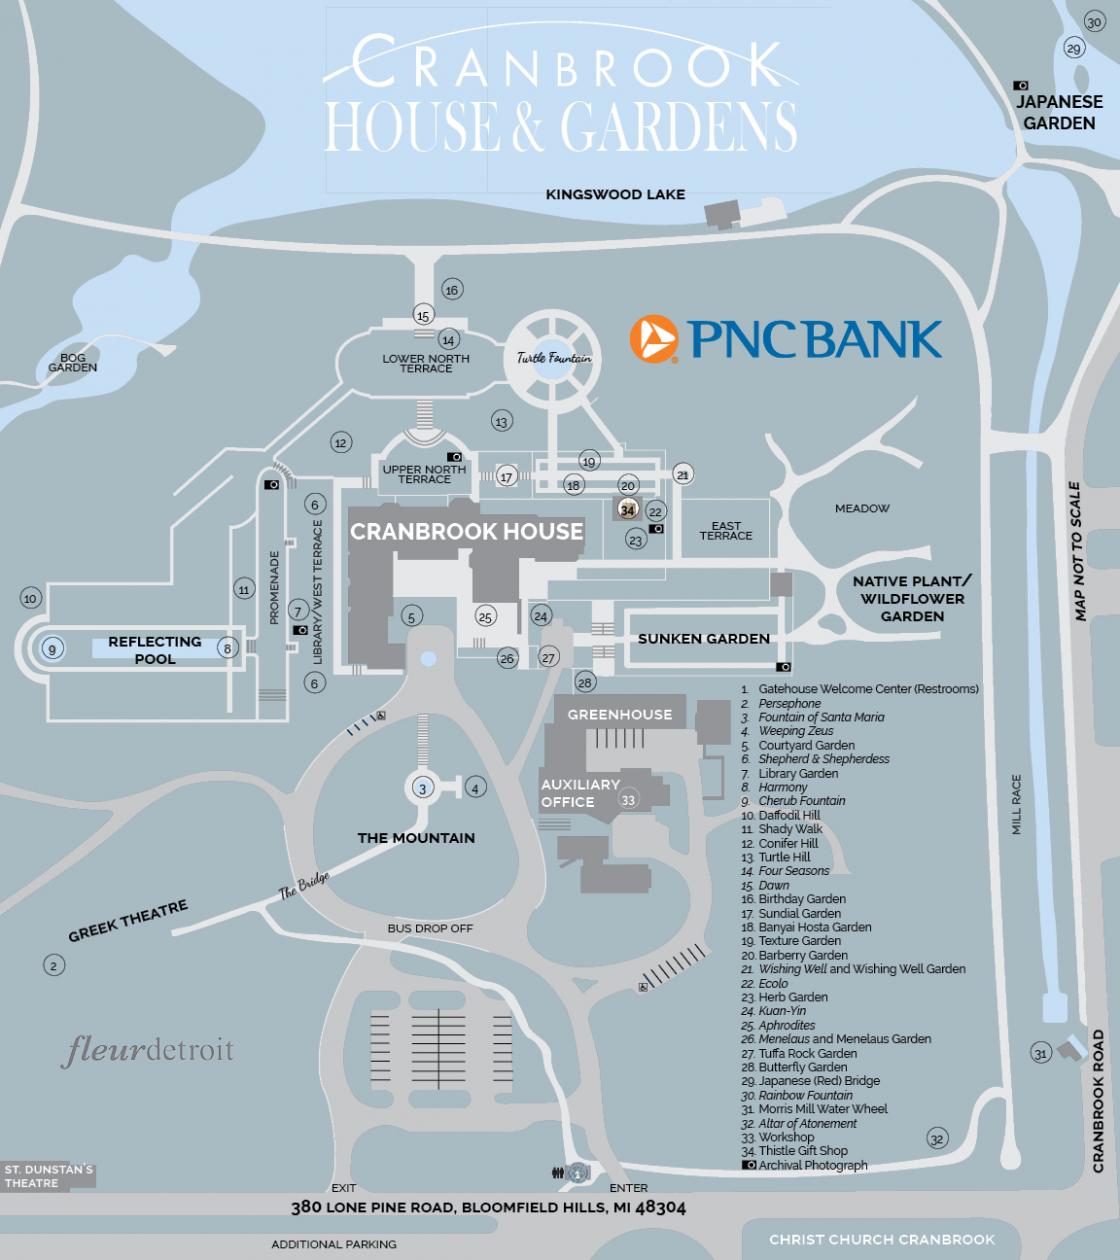 Image of the Cranbrook House & Gardens estate map.